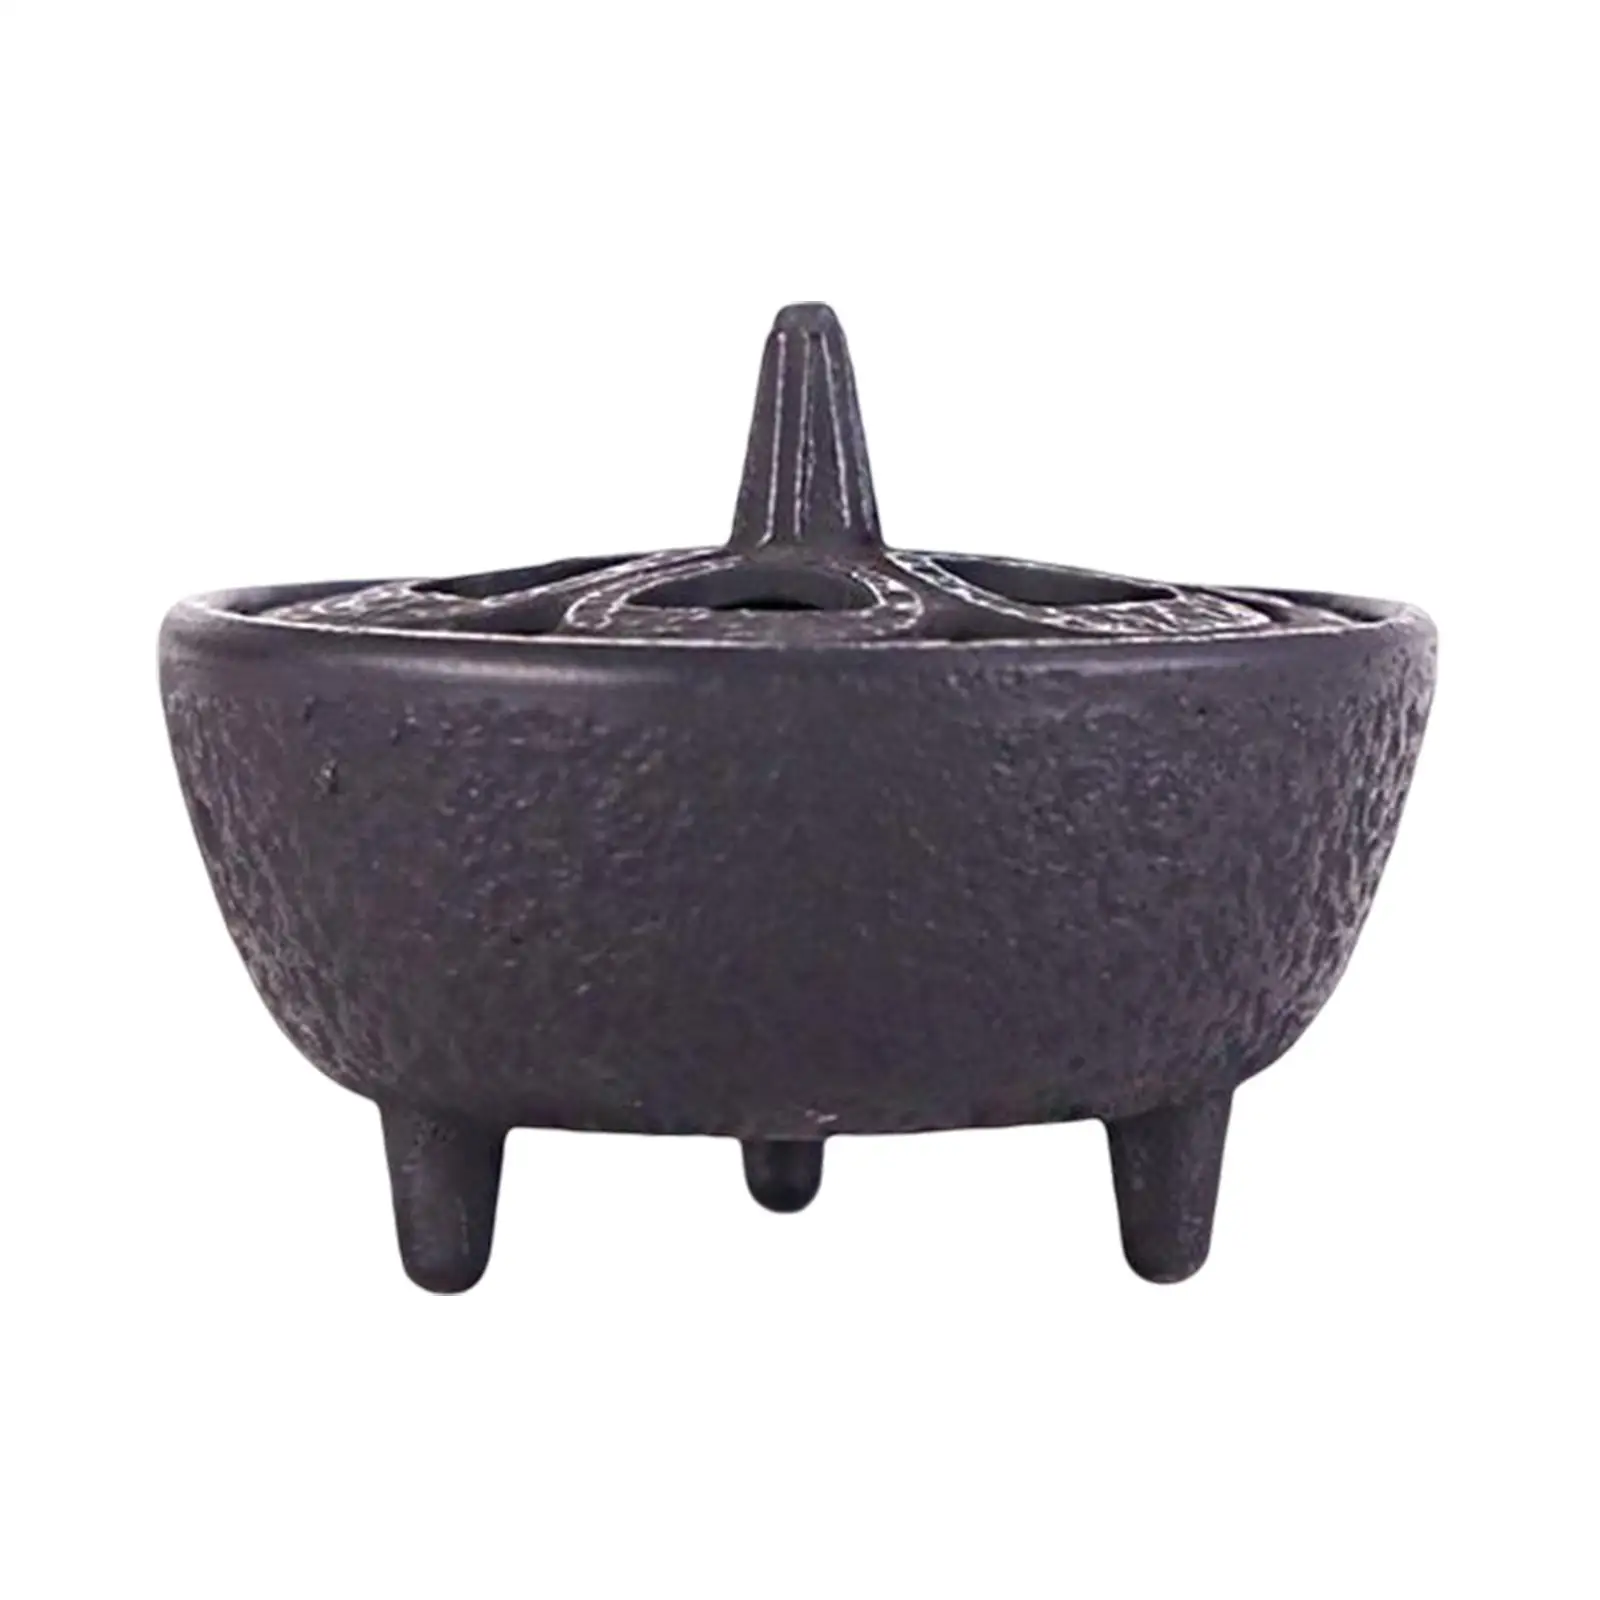 Cast Iron Incense Bowl Home Decoration Hollow Round with Lid Ornament Antique Hollow Burner Holder for Garden Patio Meditation